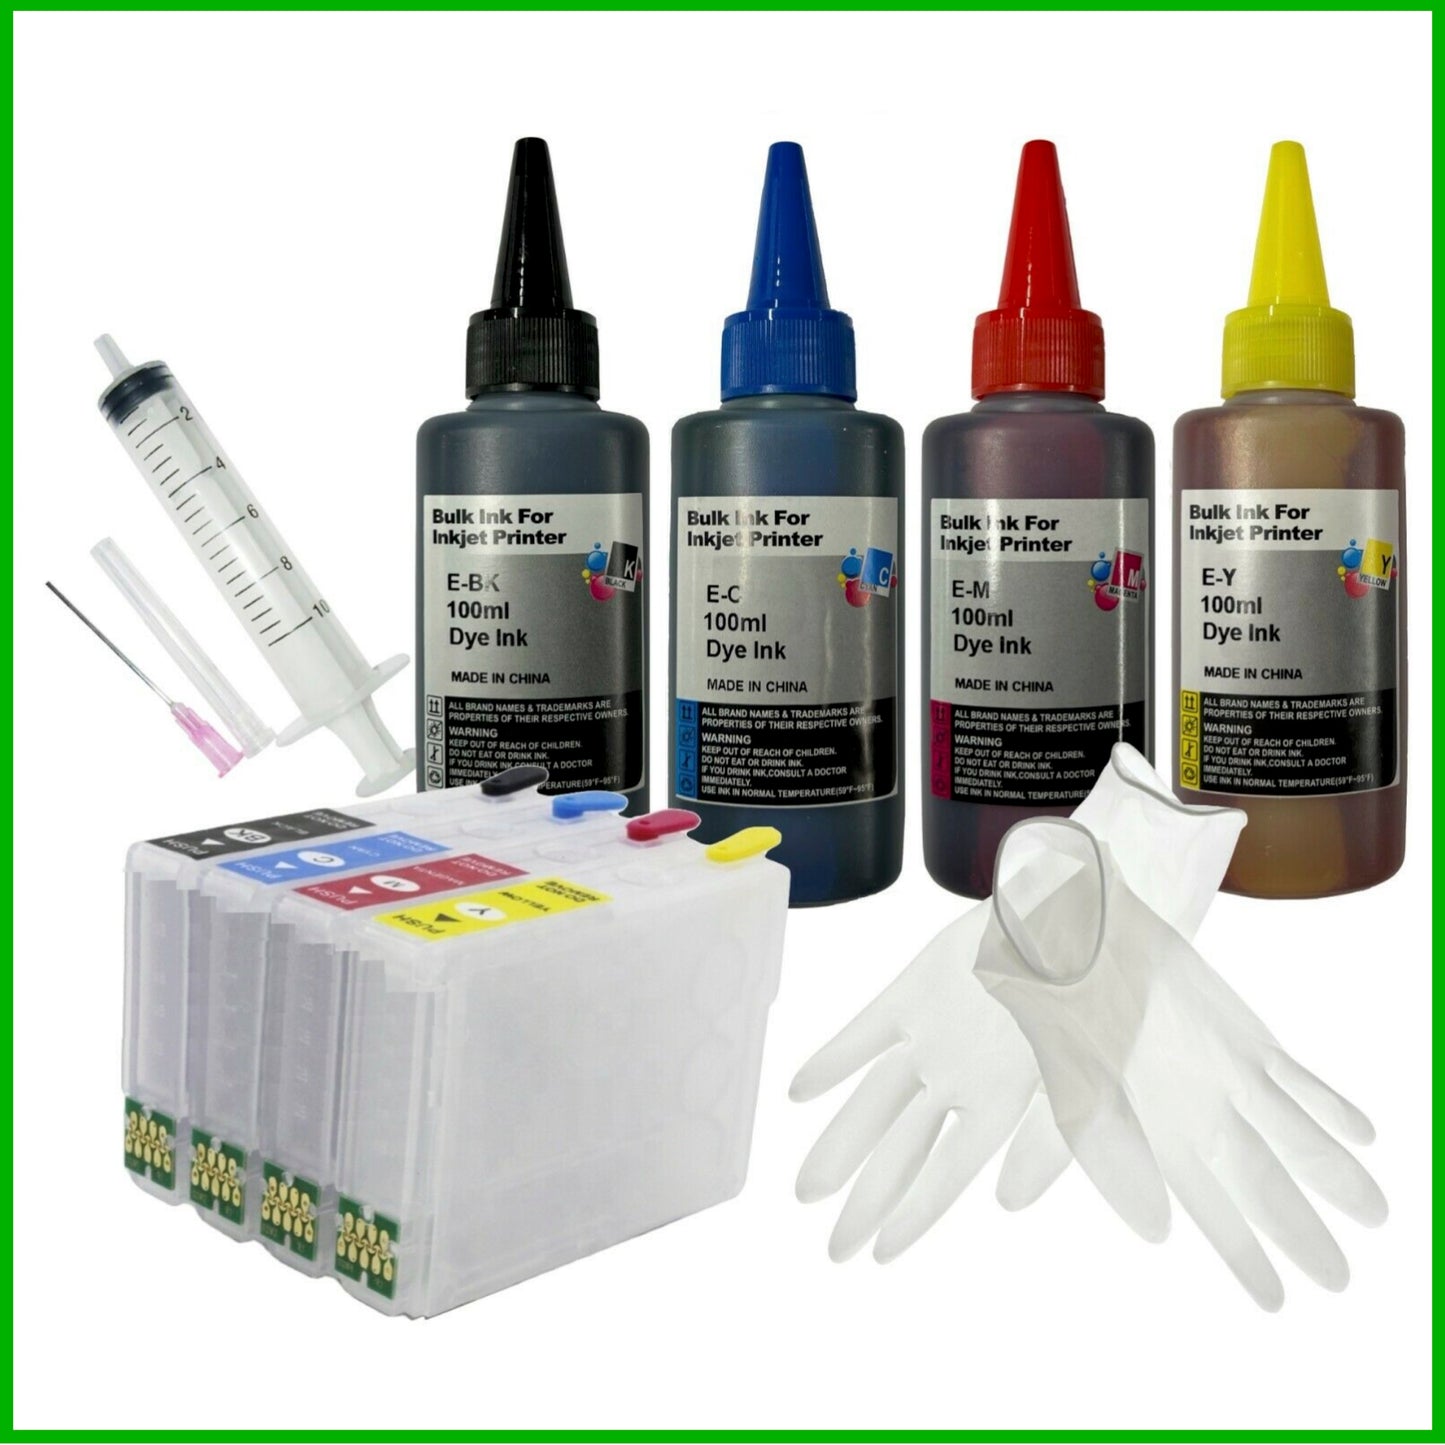 Refill Starter Kit - 18XL Cartridges with ARC Chip & Ink for Epson Expression Home